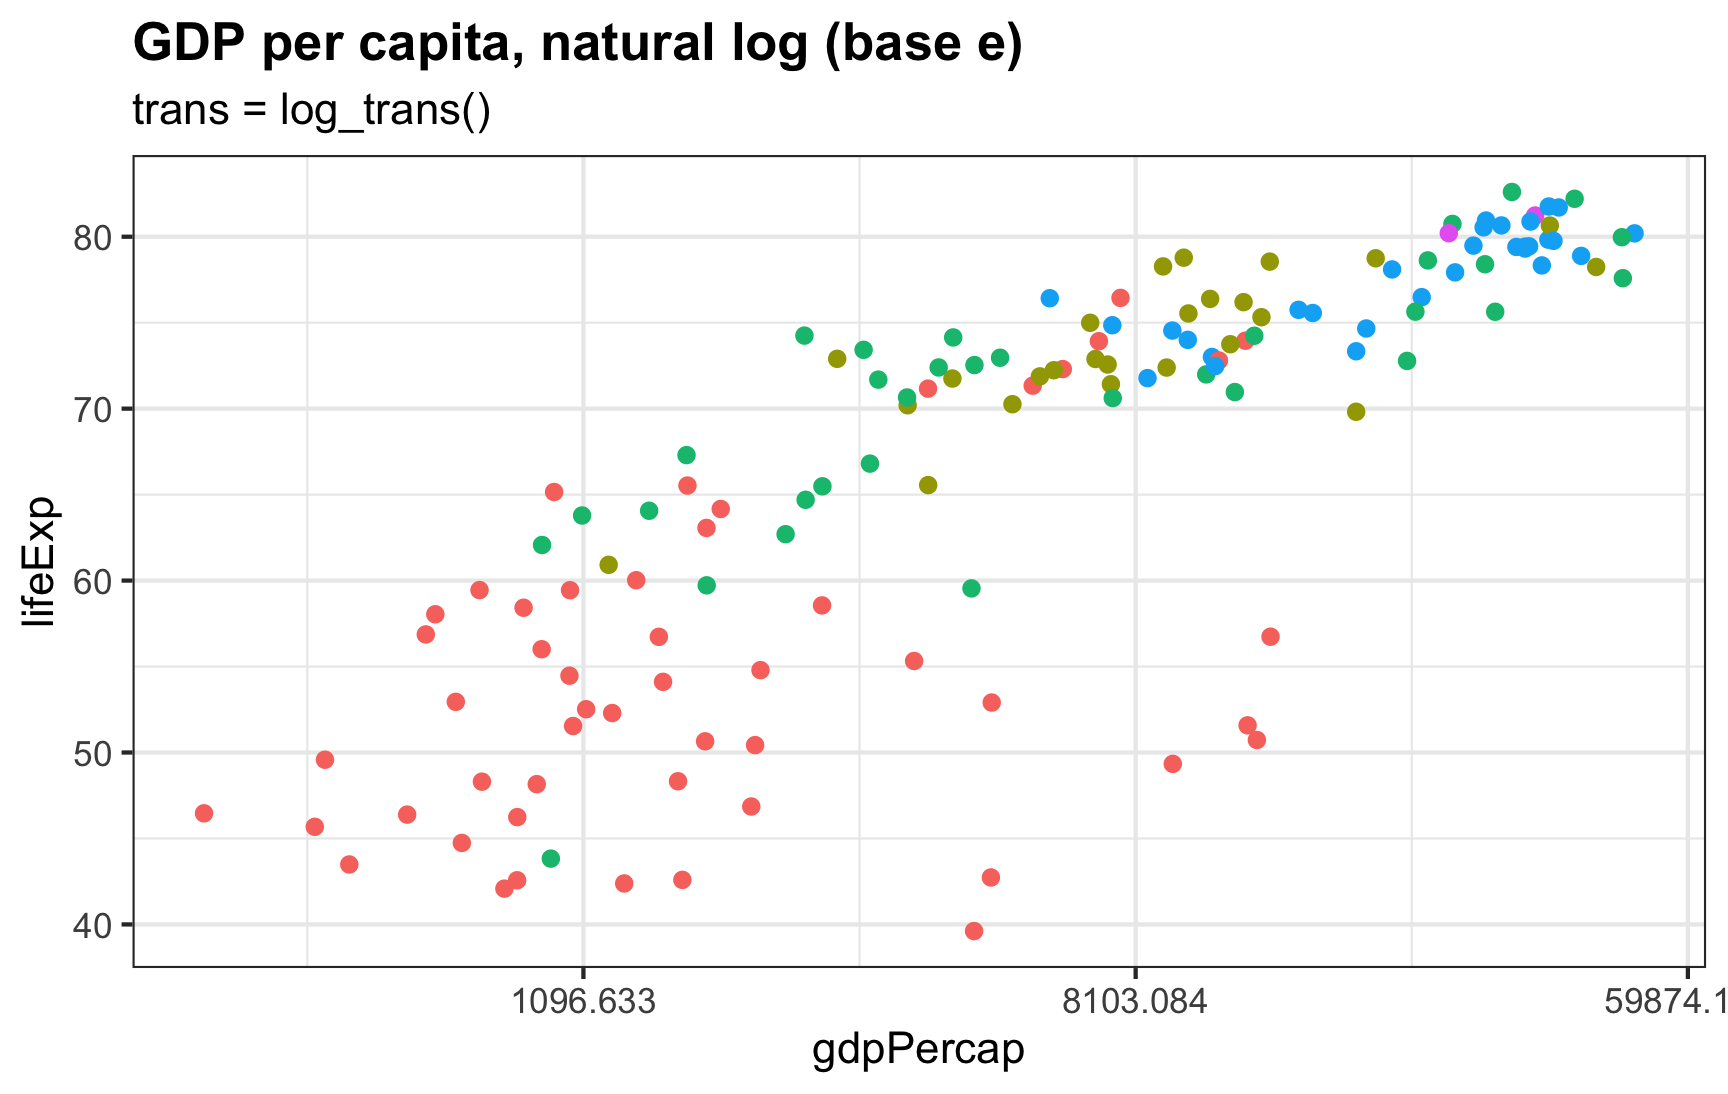 The values on the x-axis are now logged by ggplot. The x-axis labels are on the dollar scale instead of the log scale. This makes it a little easier to interpret, but the numbers are gross: 1096.633, 8103.084, and 59874.142, or $e^7$, $e^9$, and $e^{11}$